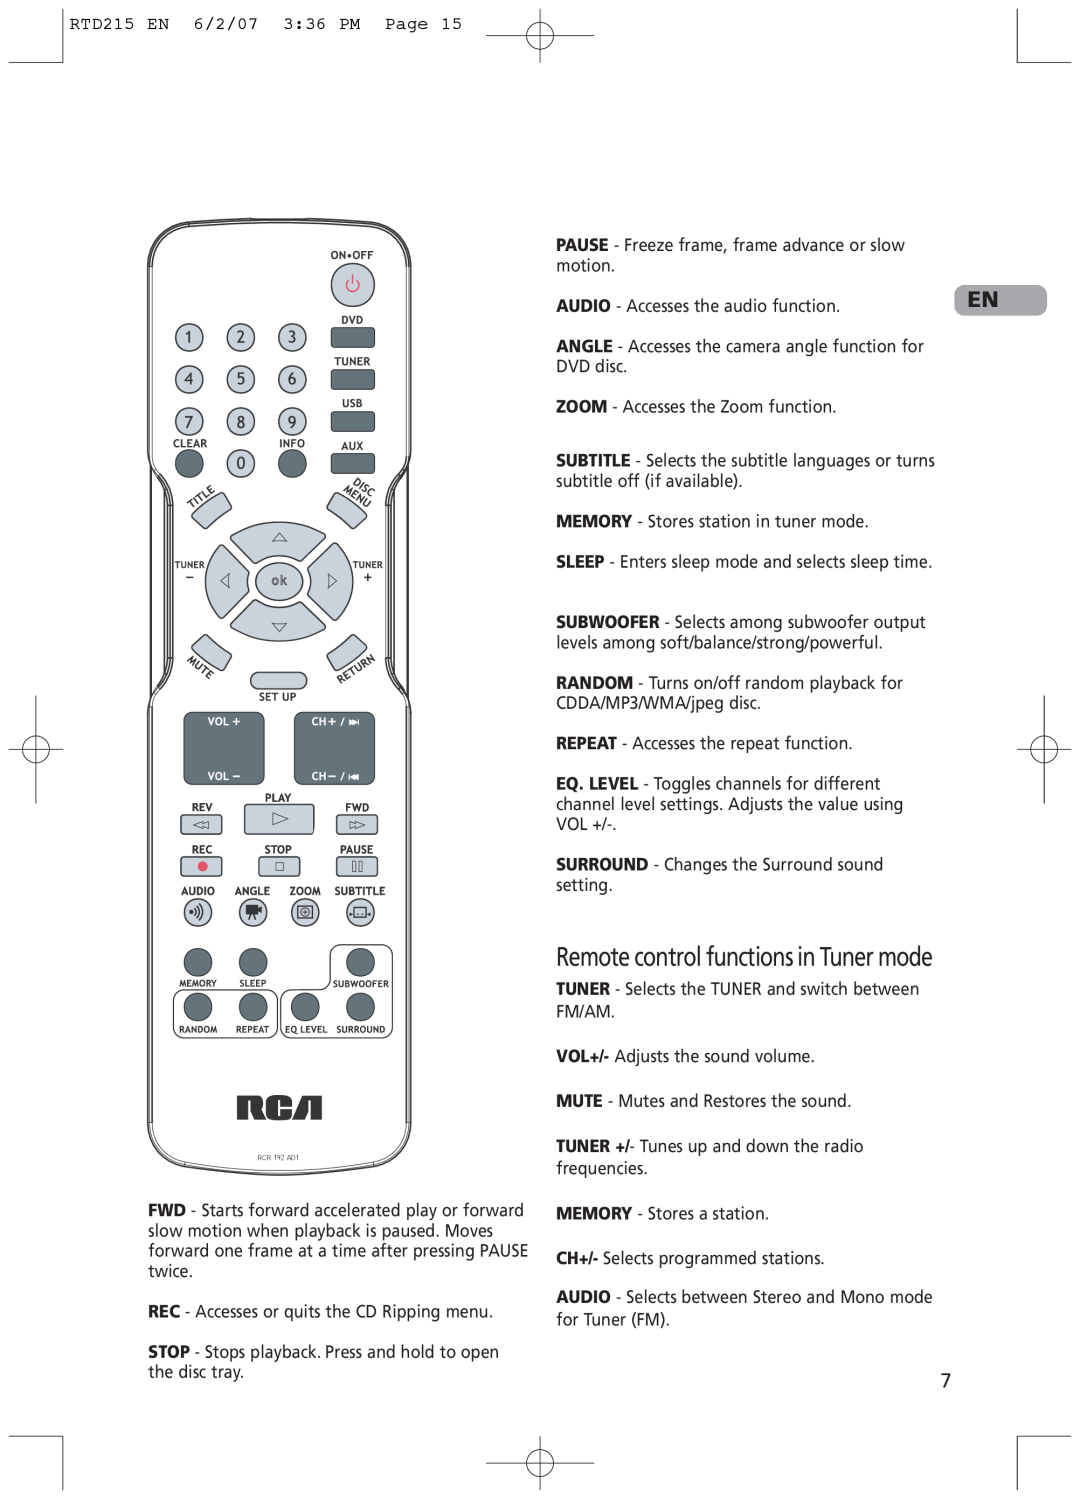 RCA RTD215 user manual Remote control functions in Tuner mode, AUDIO - Accesses the audio function 